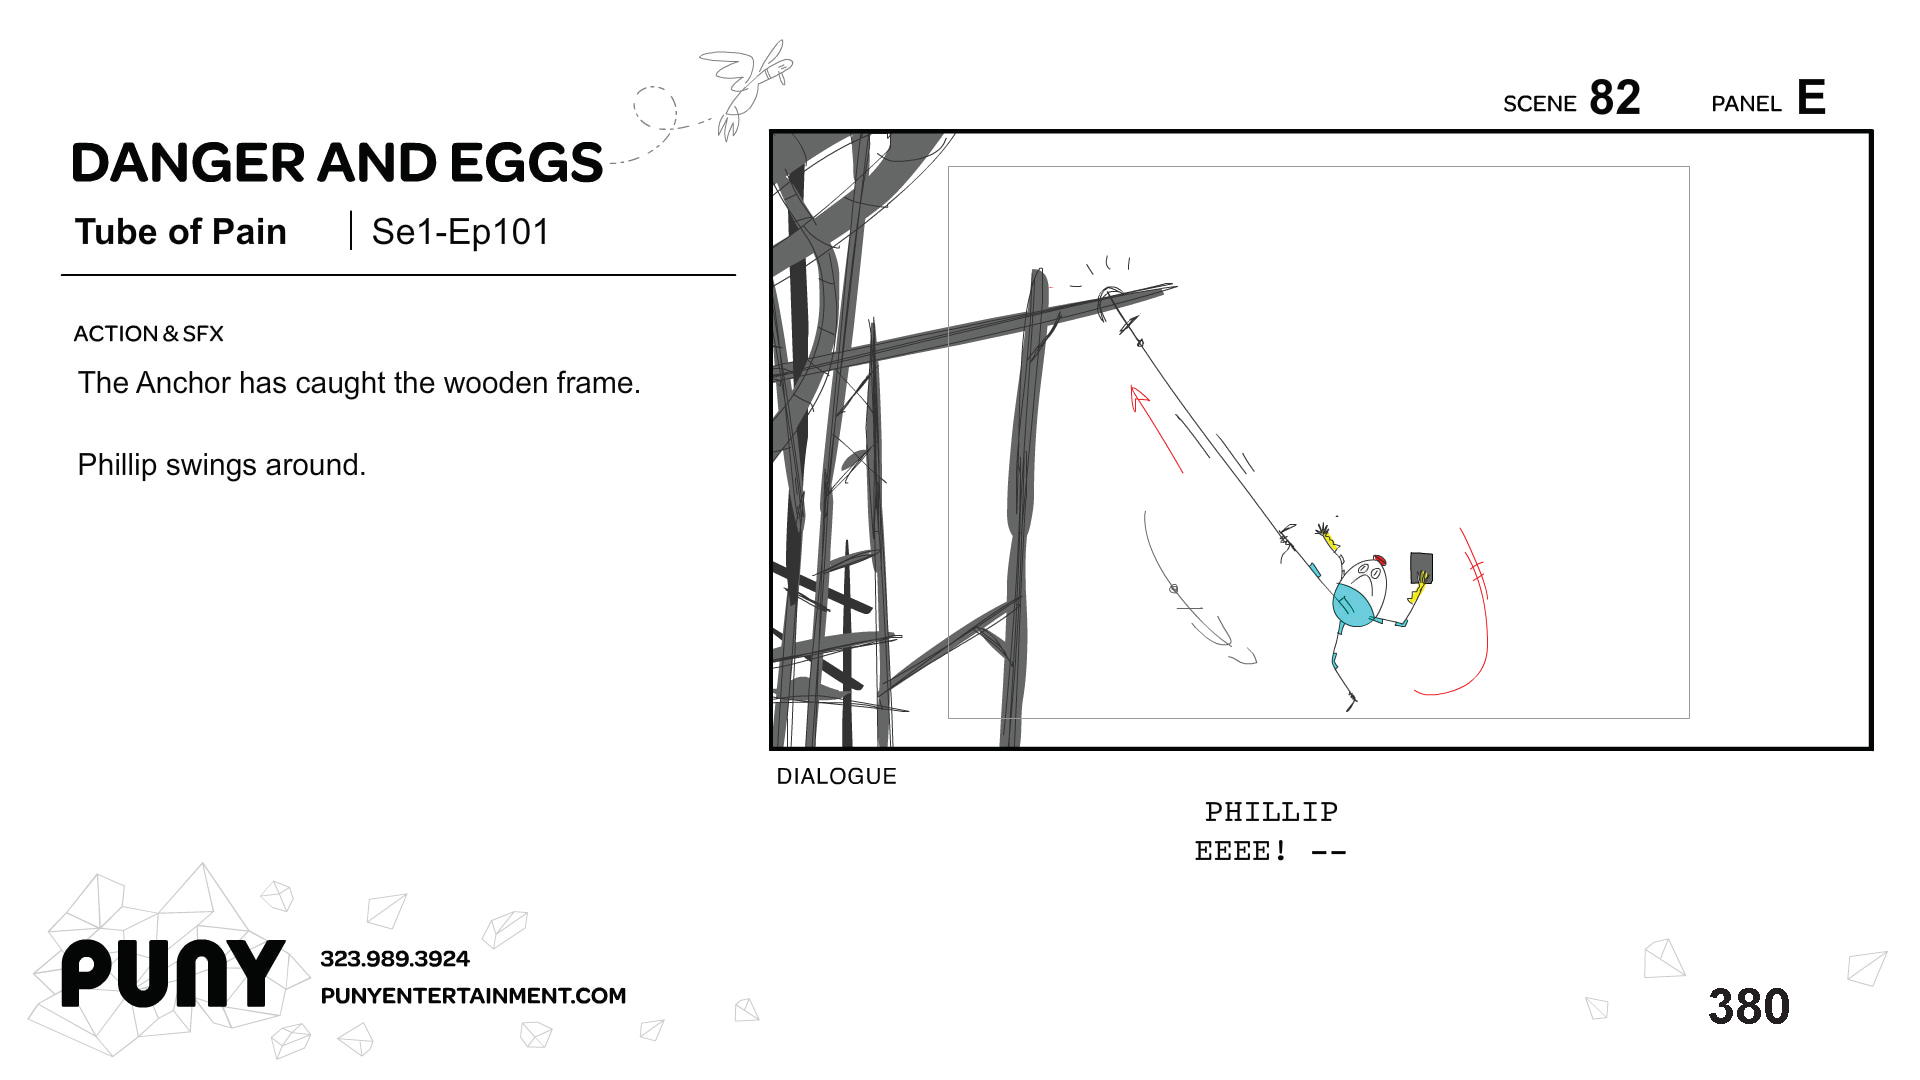 MikeOwens_STORYBOARDS_DangerAndEggs_Page_275.png